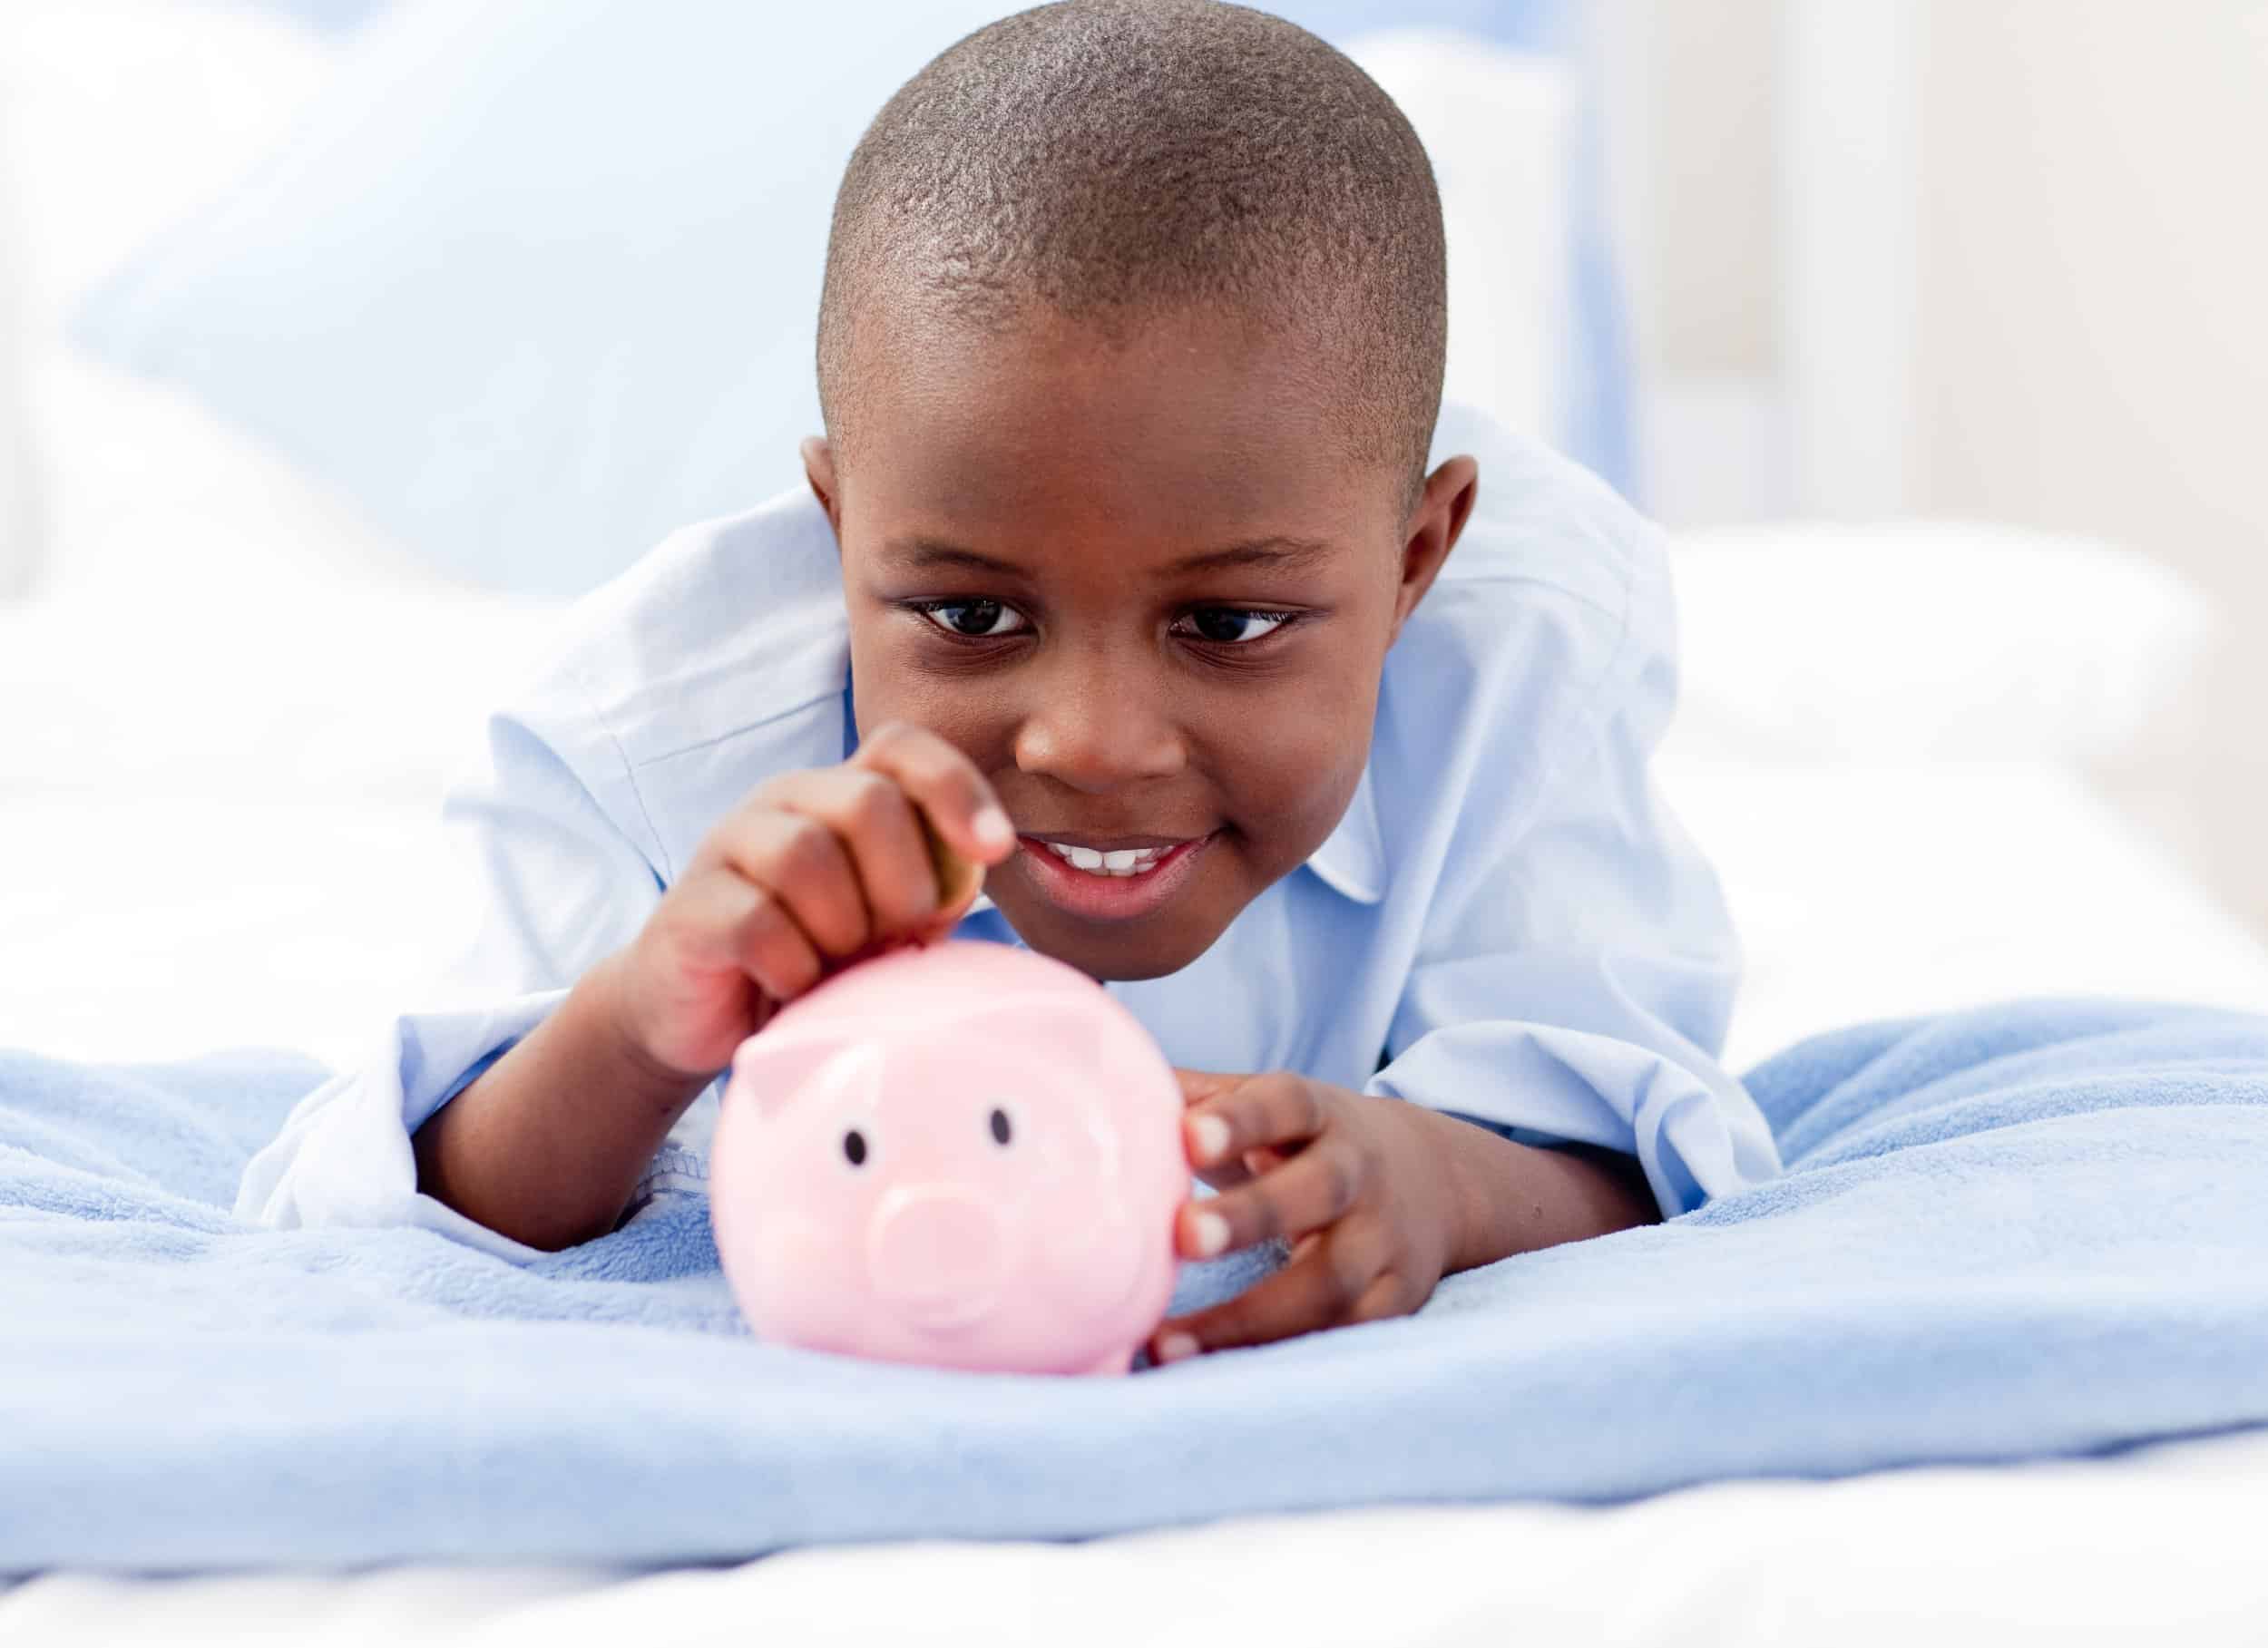 Should You Give Your Kids an Allowance?